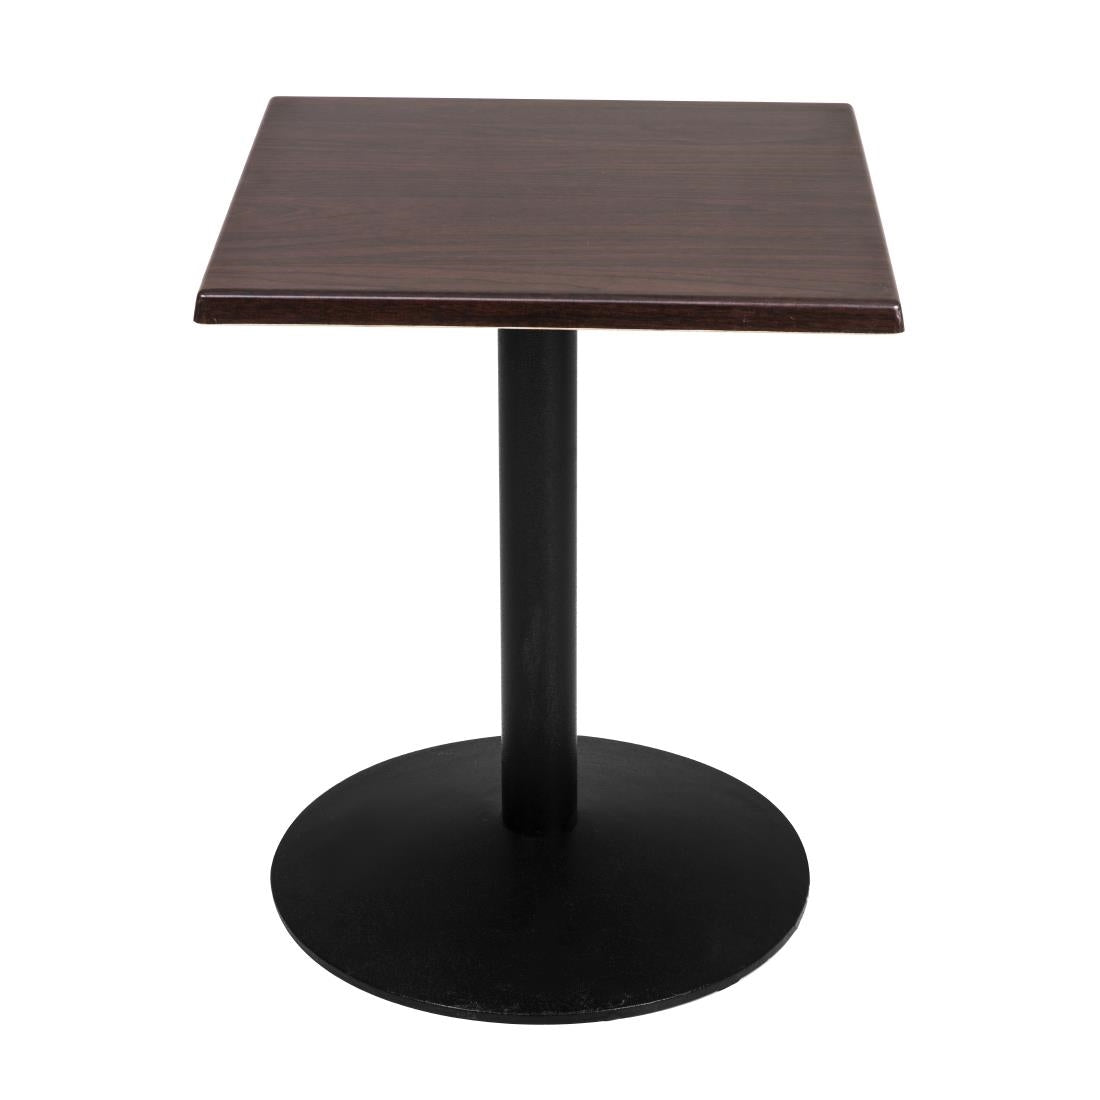 GG635 Bolero Pre-drilled Square Table Top Dark Brown 600mm JD Catering Equipment Solutions Ltd